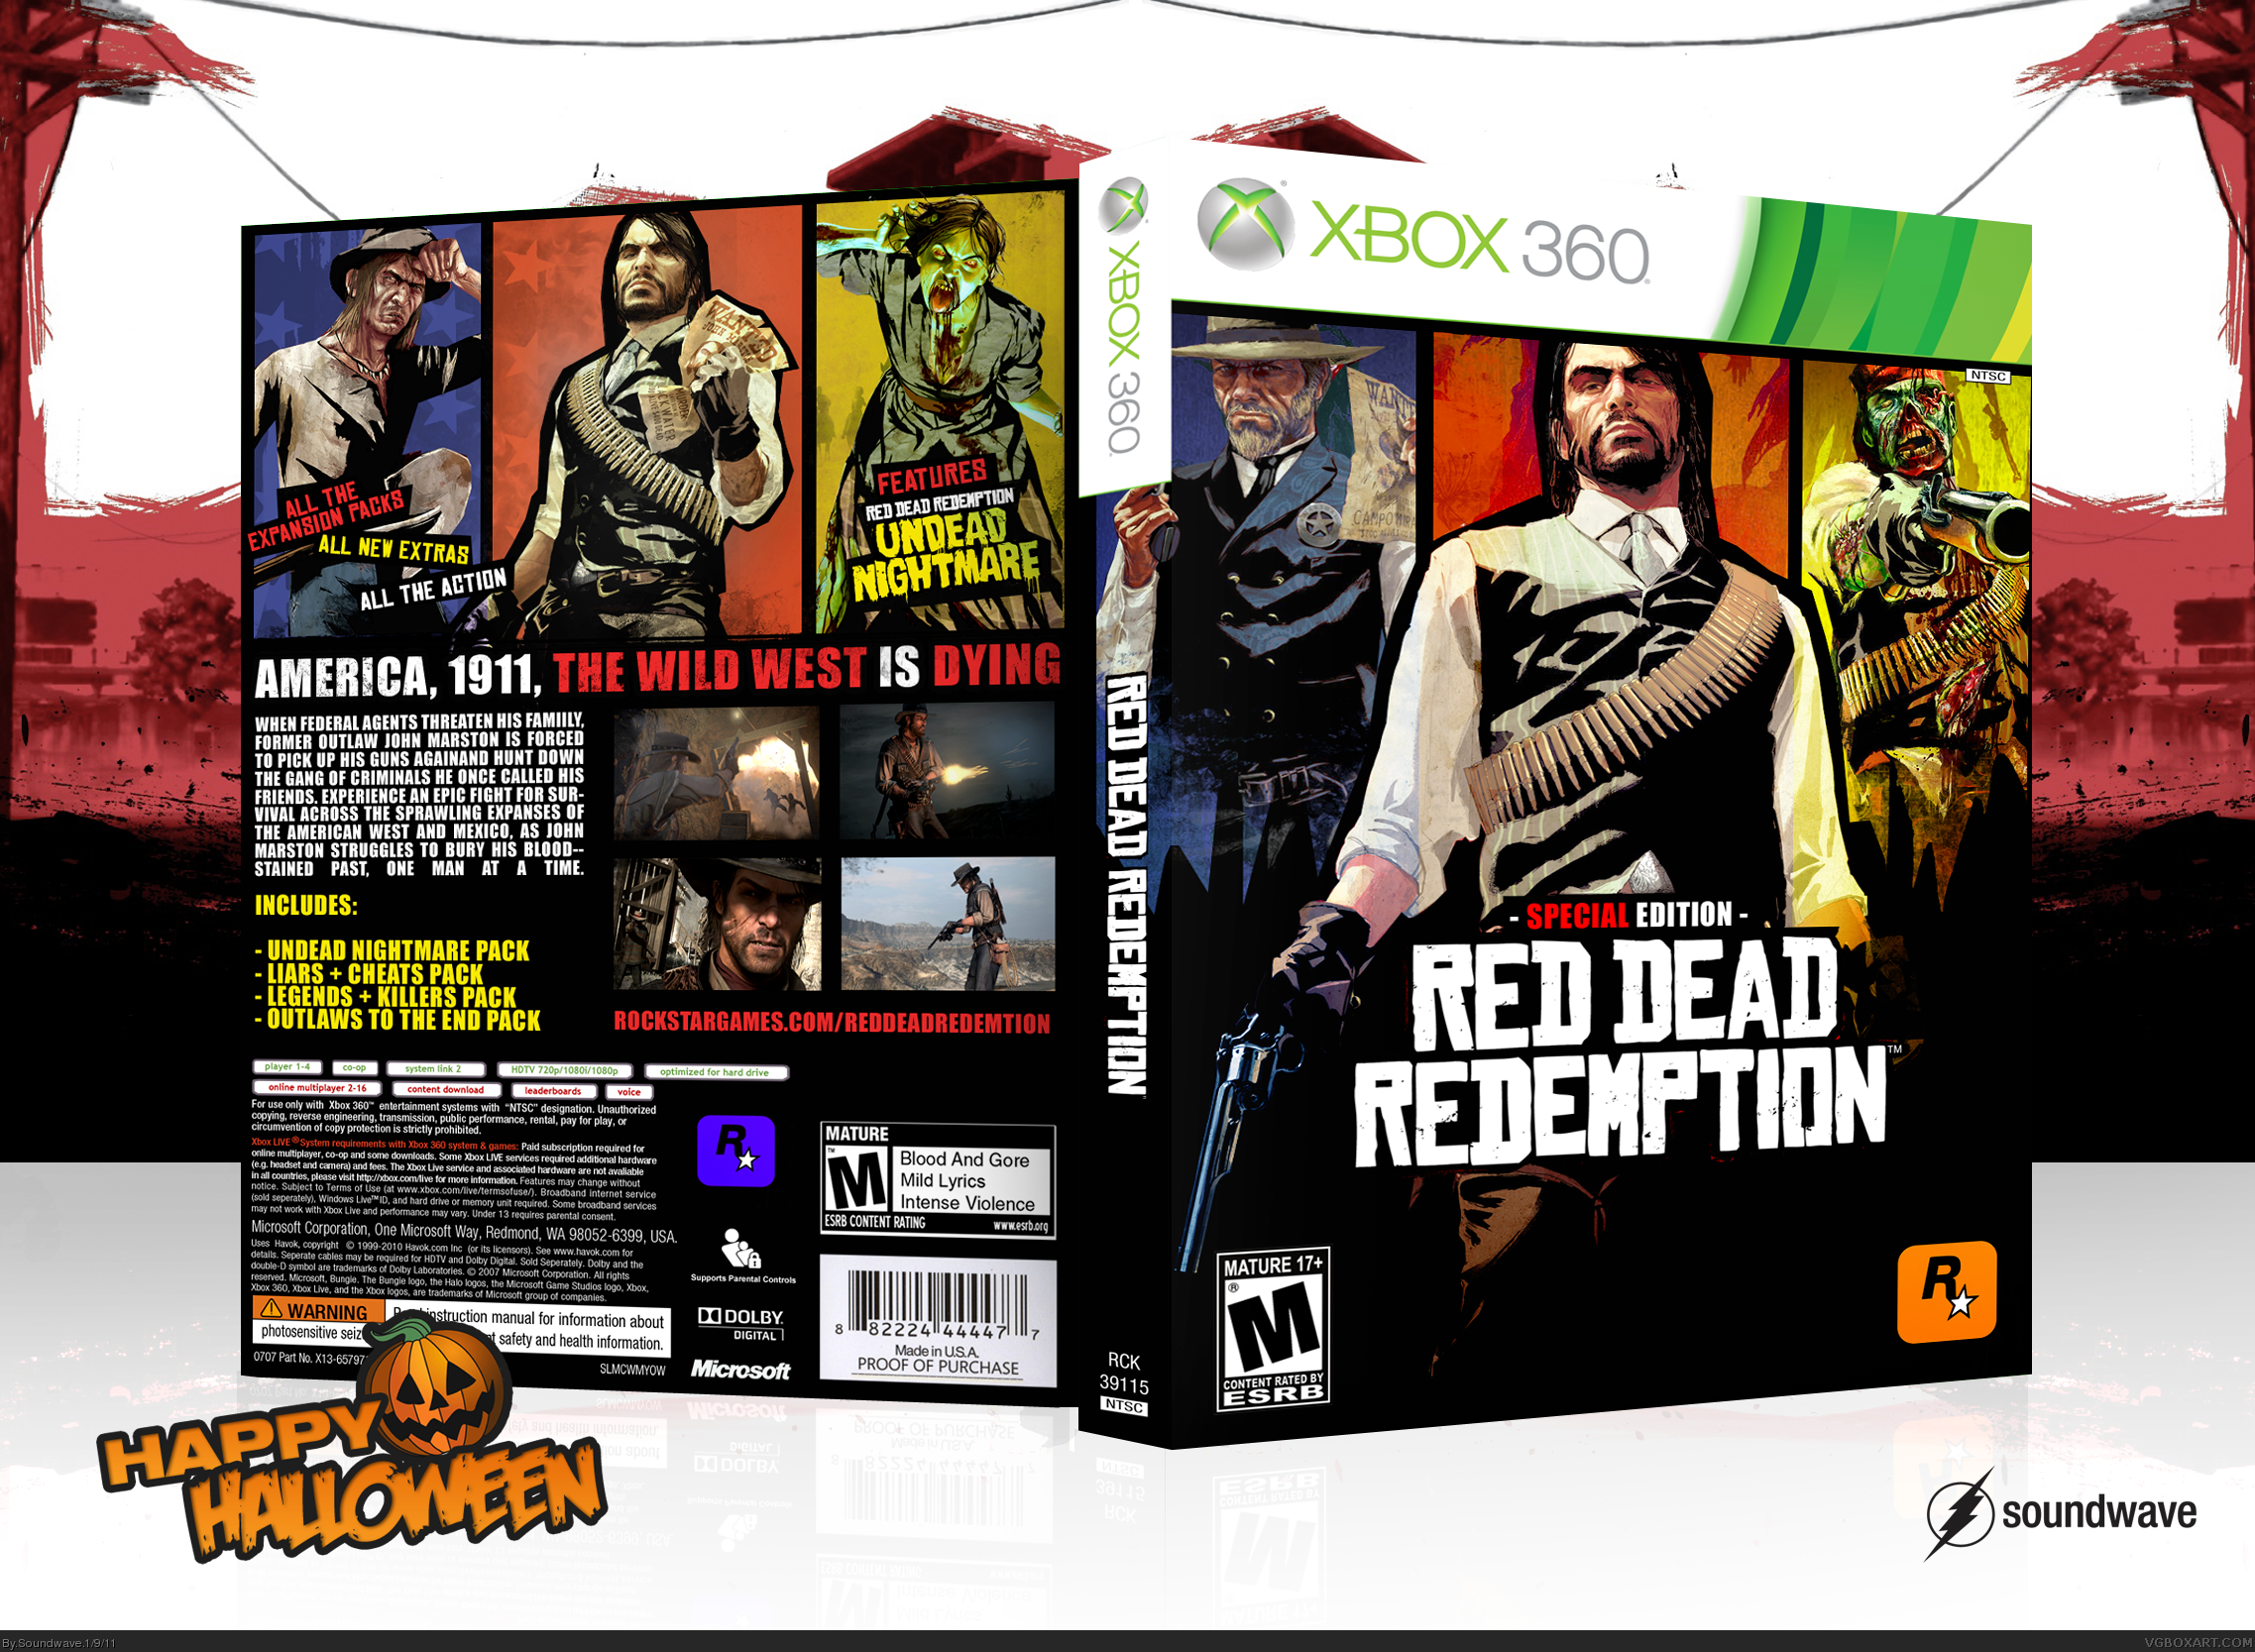 Red Dead Redemtion: Special Edition box cover